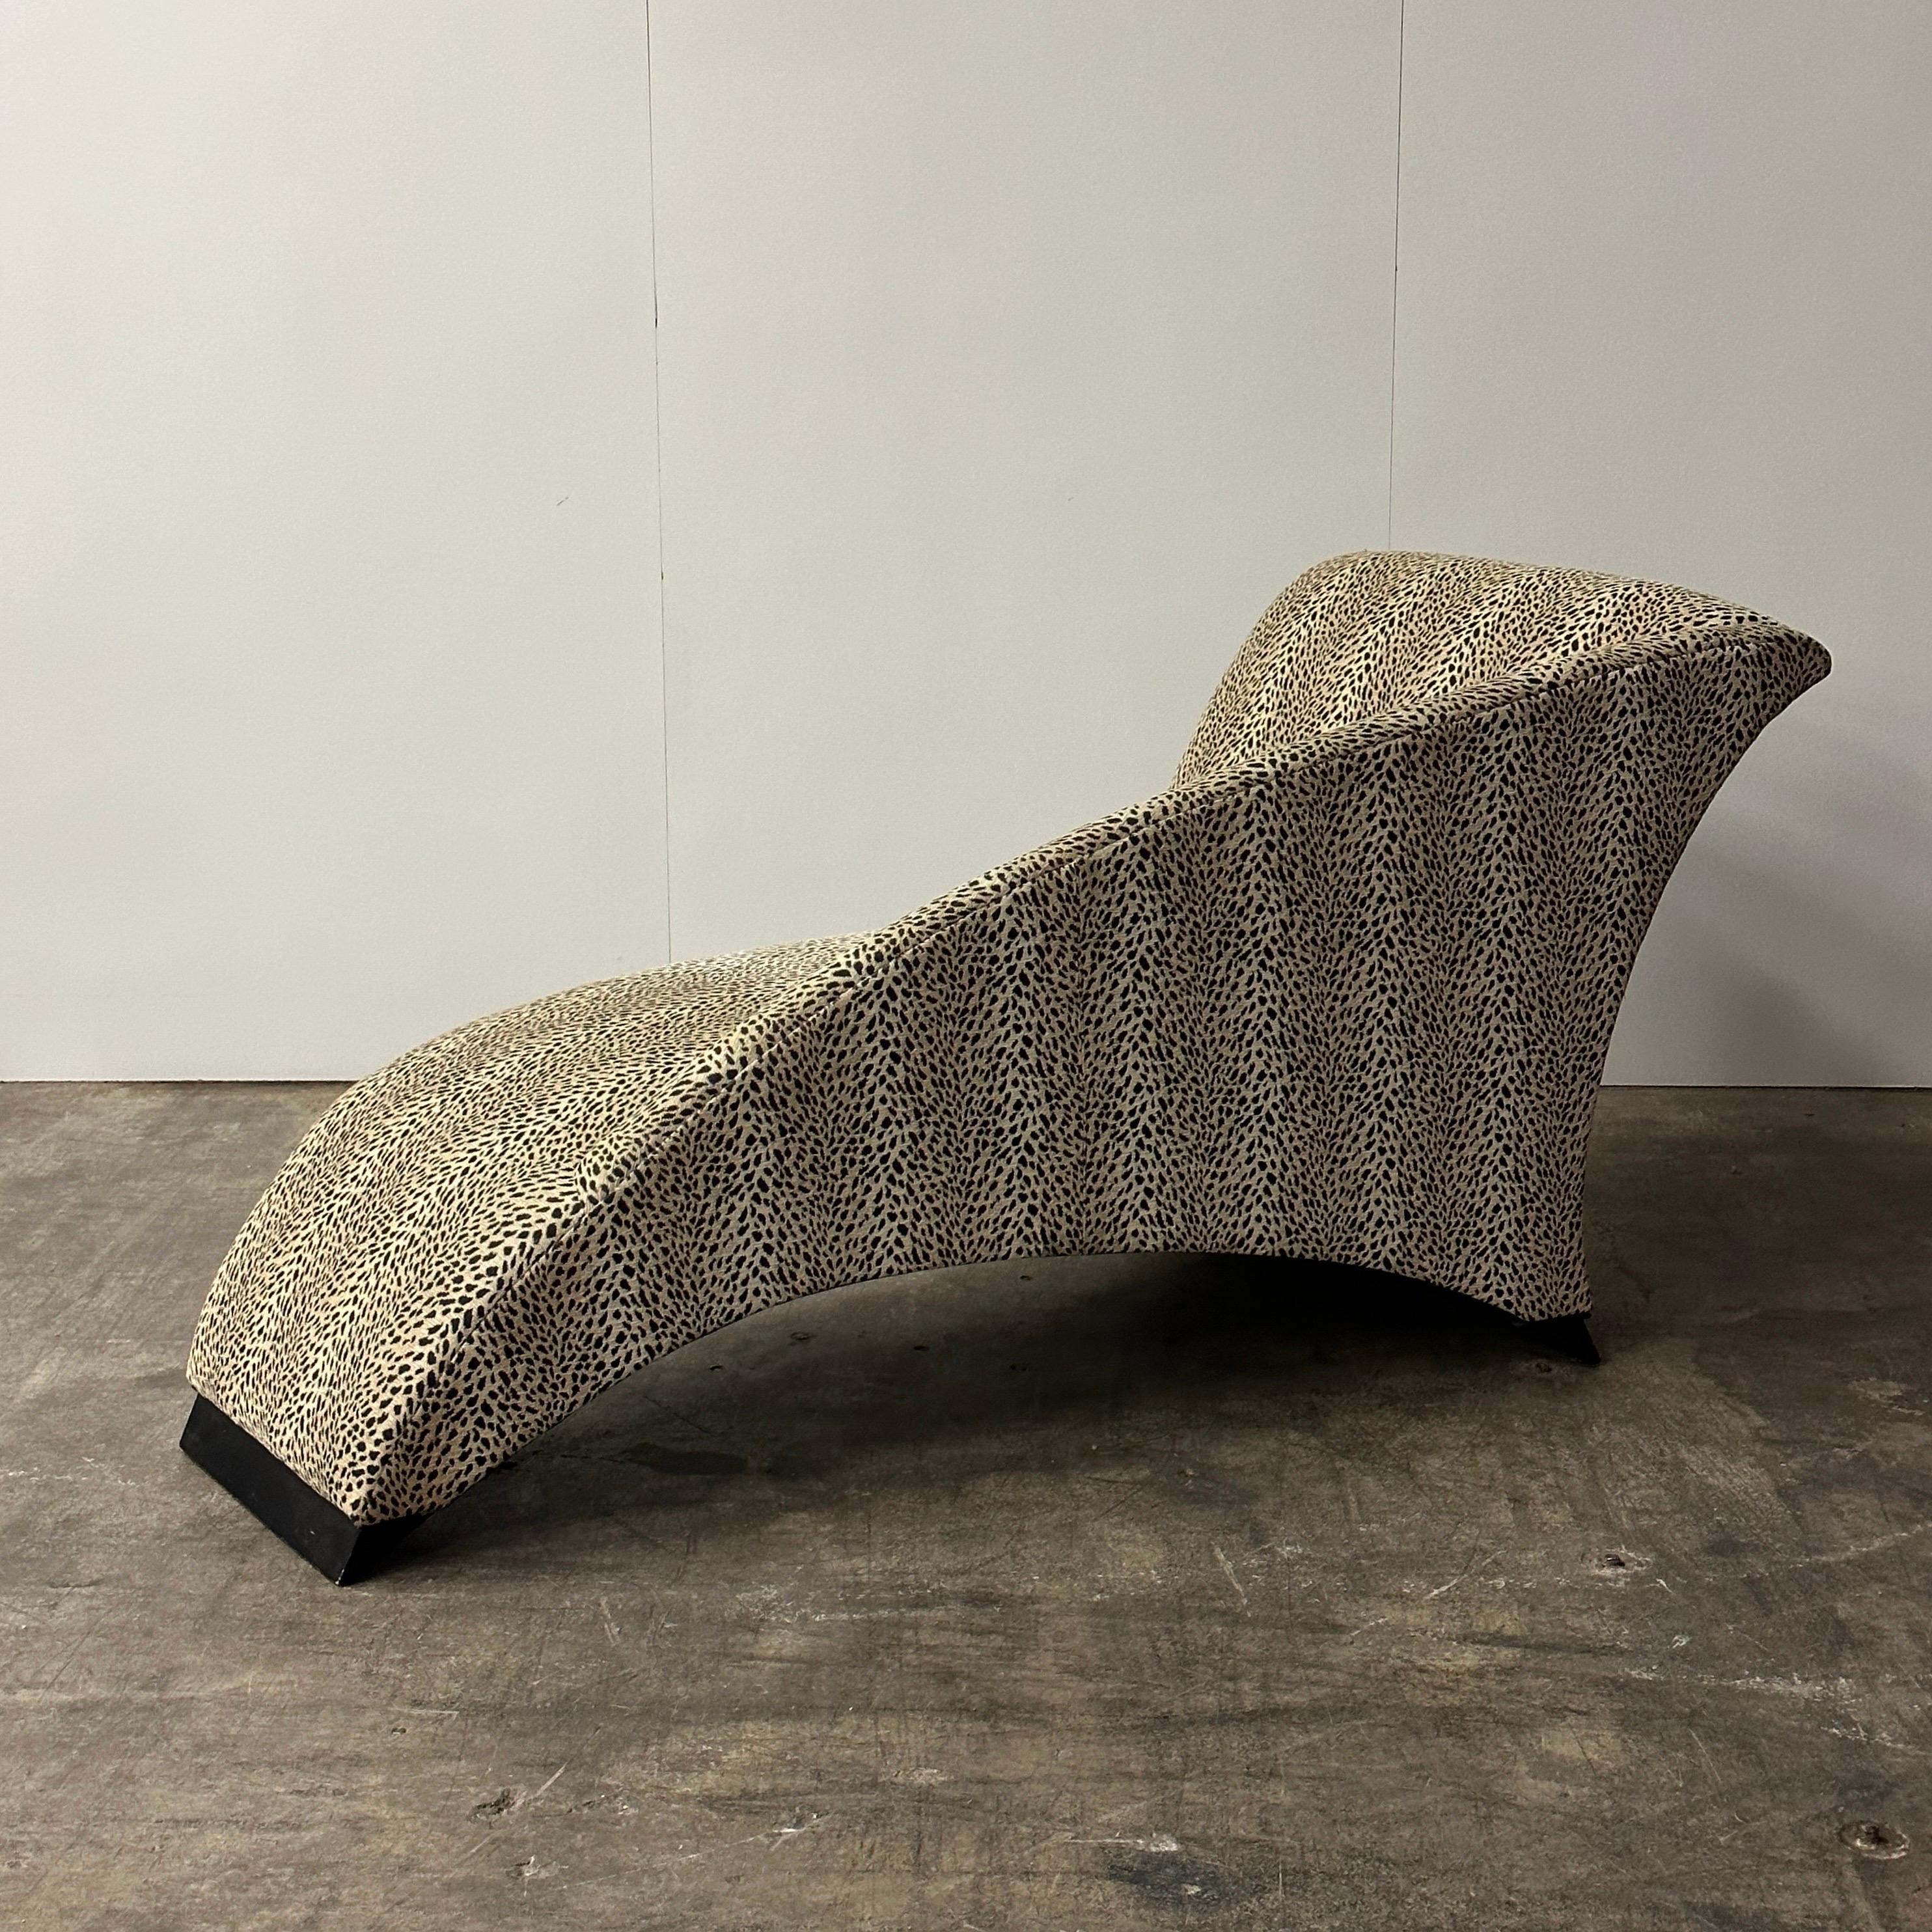 American Marilyn Chaise by Vladimir Kagan for Directional